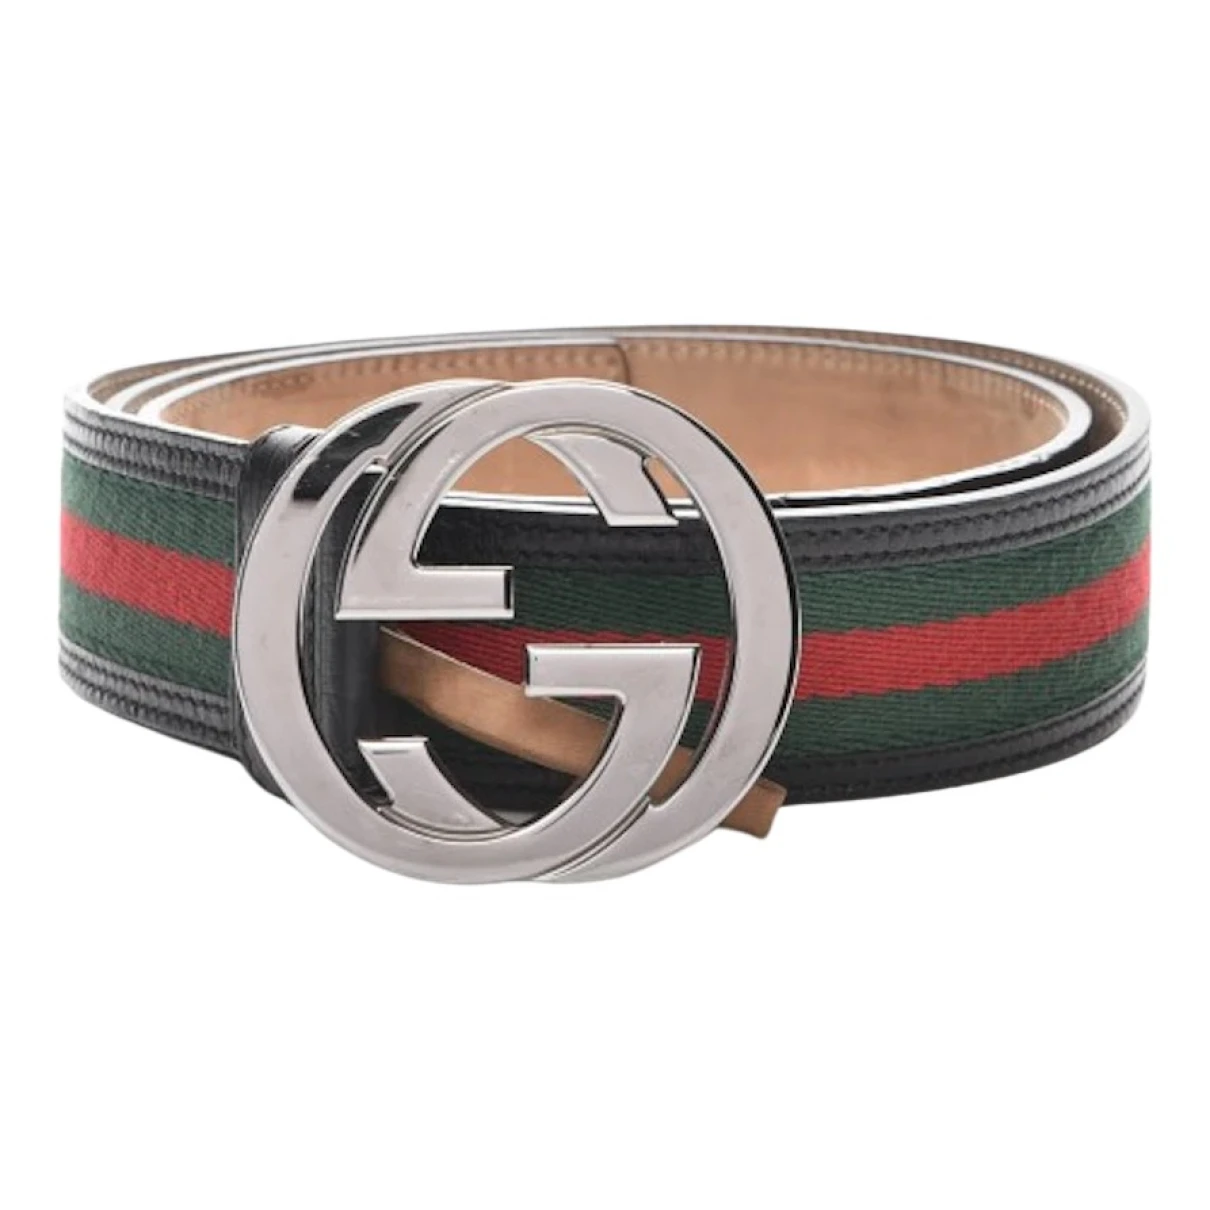 accessories Gucci belts Interlocking Buckle for Male Leather 85 cm. Used condition